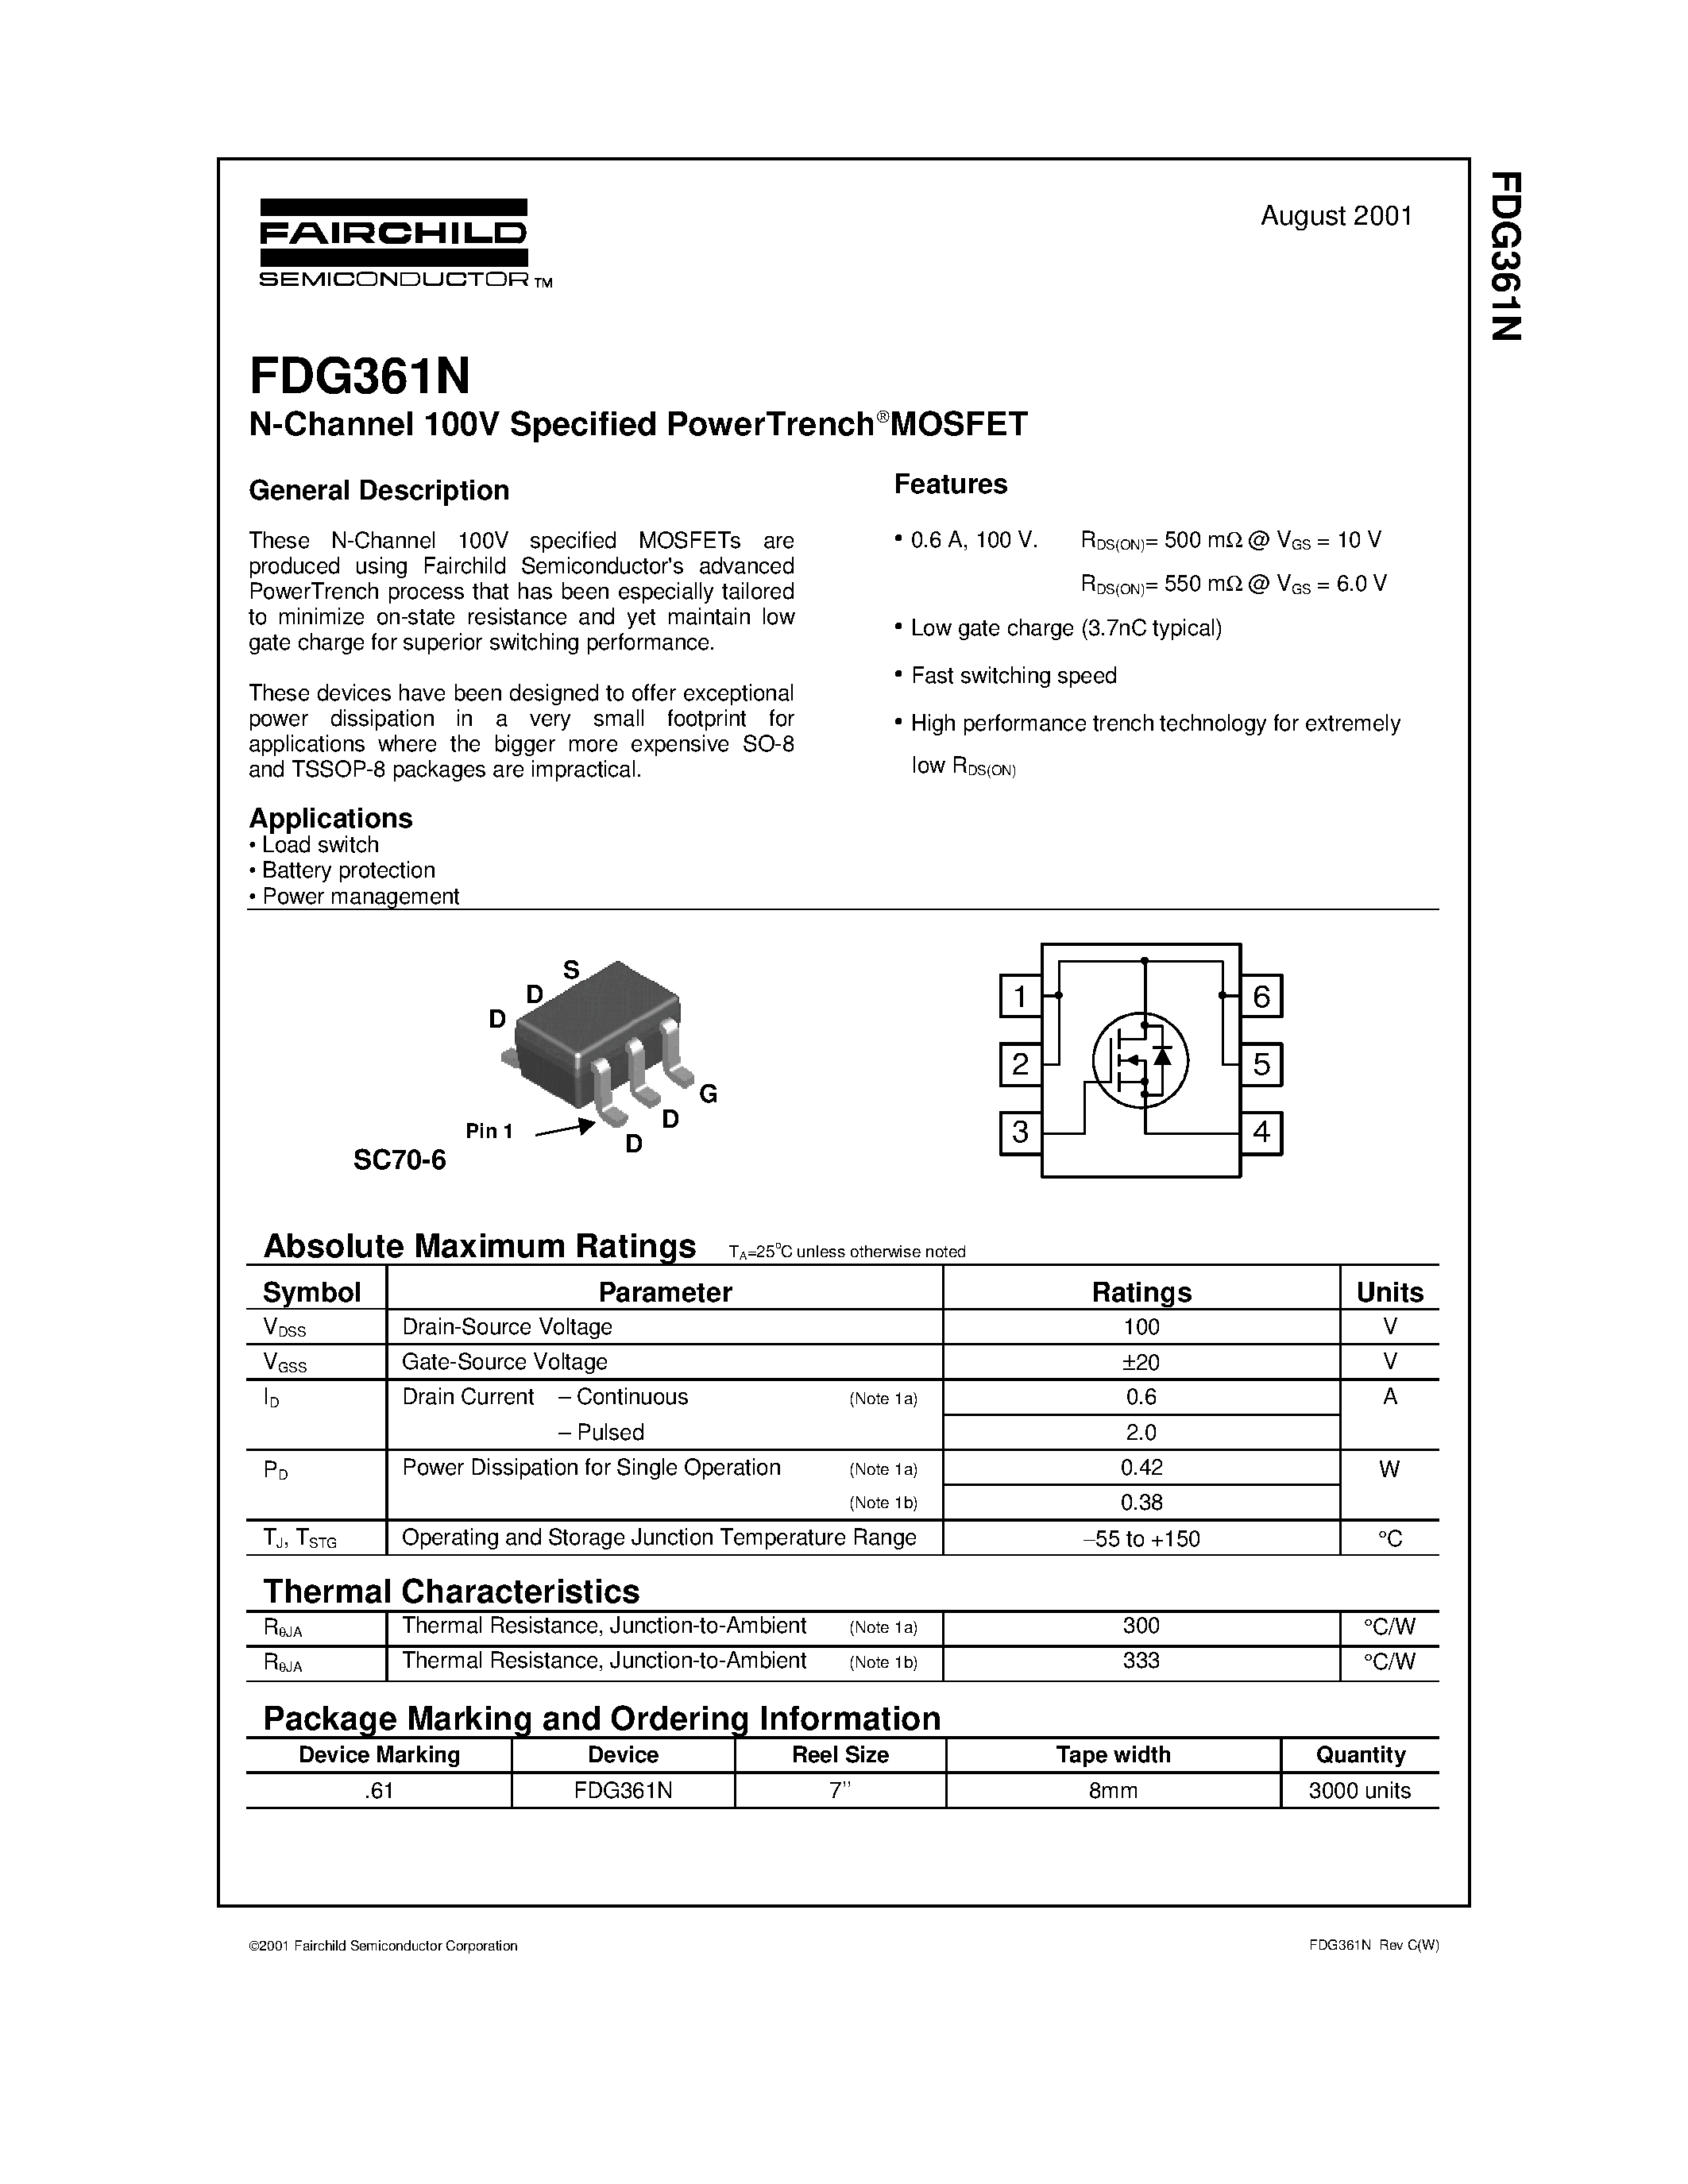 Datasheet FDG361N - N-Channel 100V Specified PowerTrenchMOSFET page 1